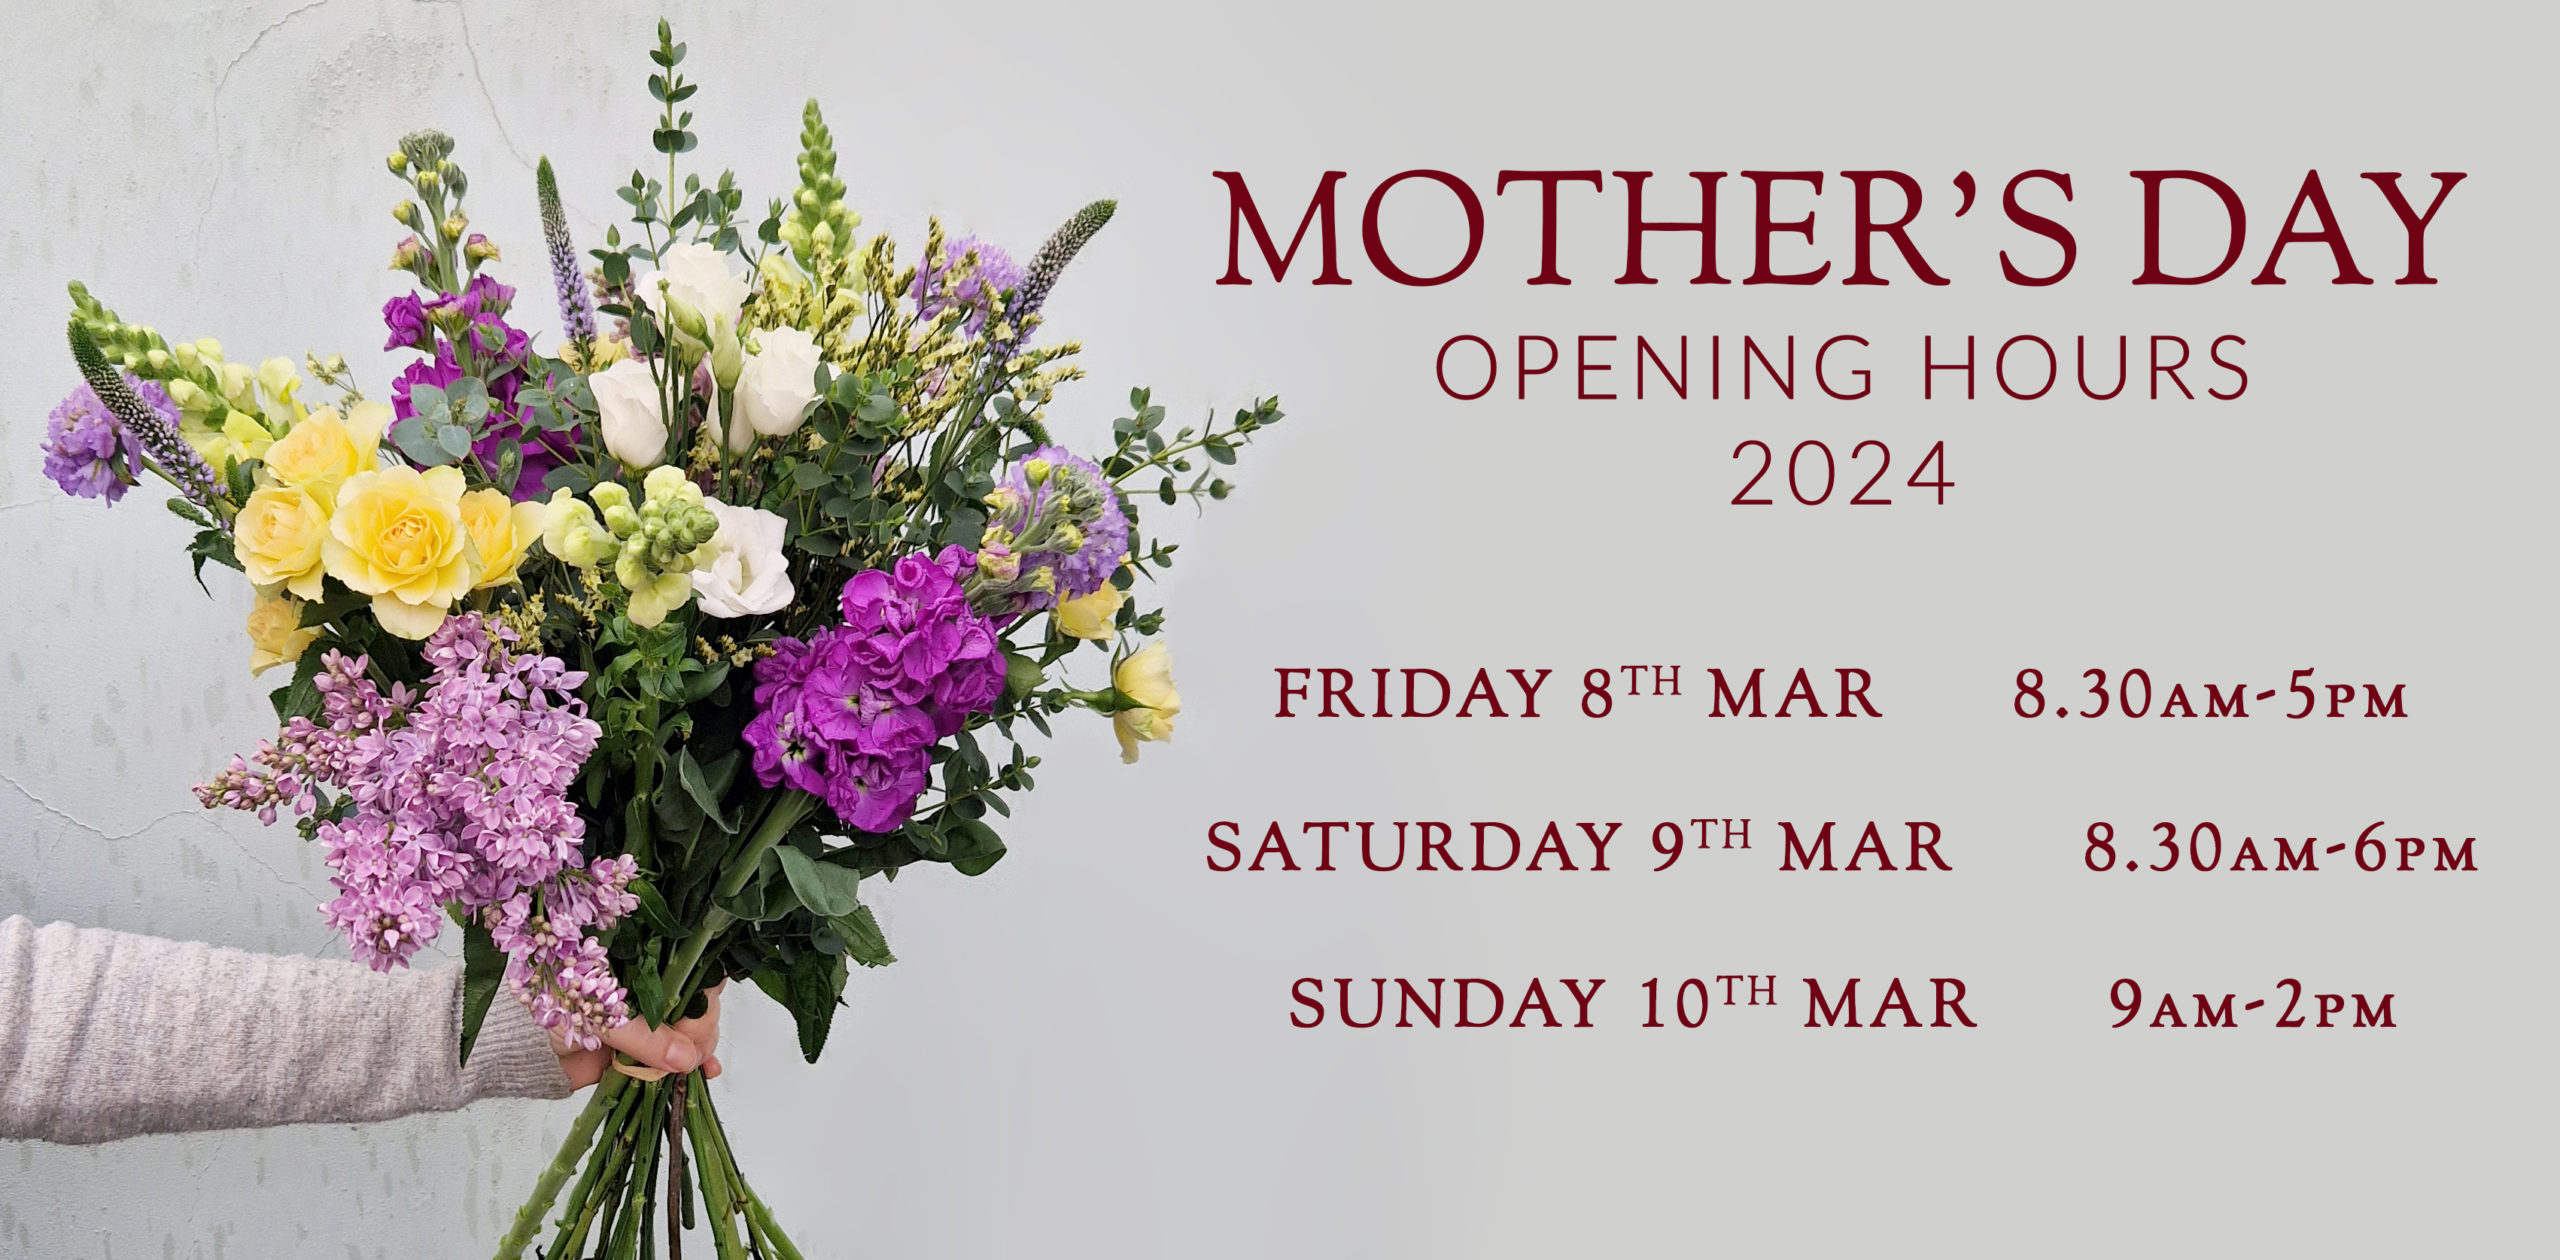 Mothers Day Opening Hours 2024